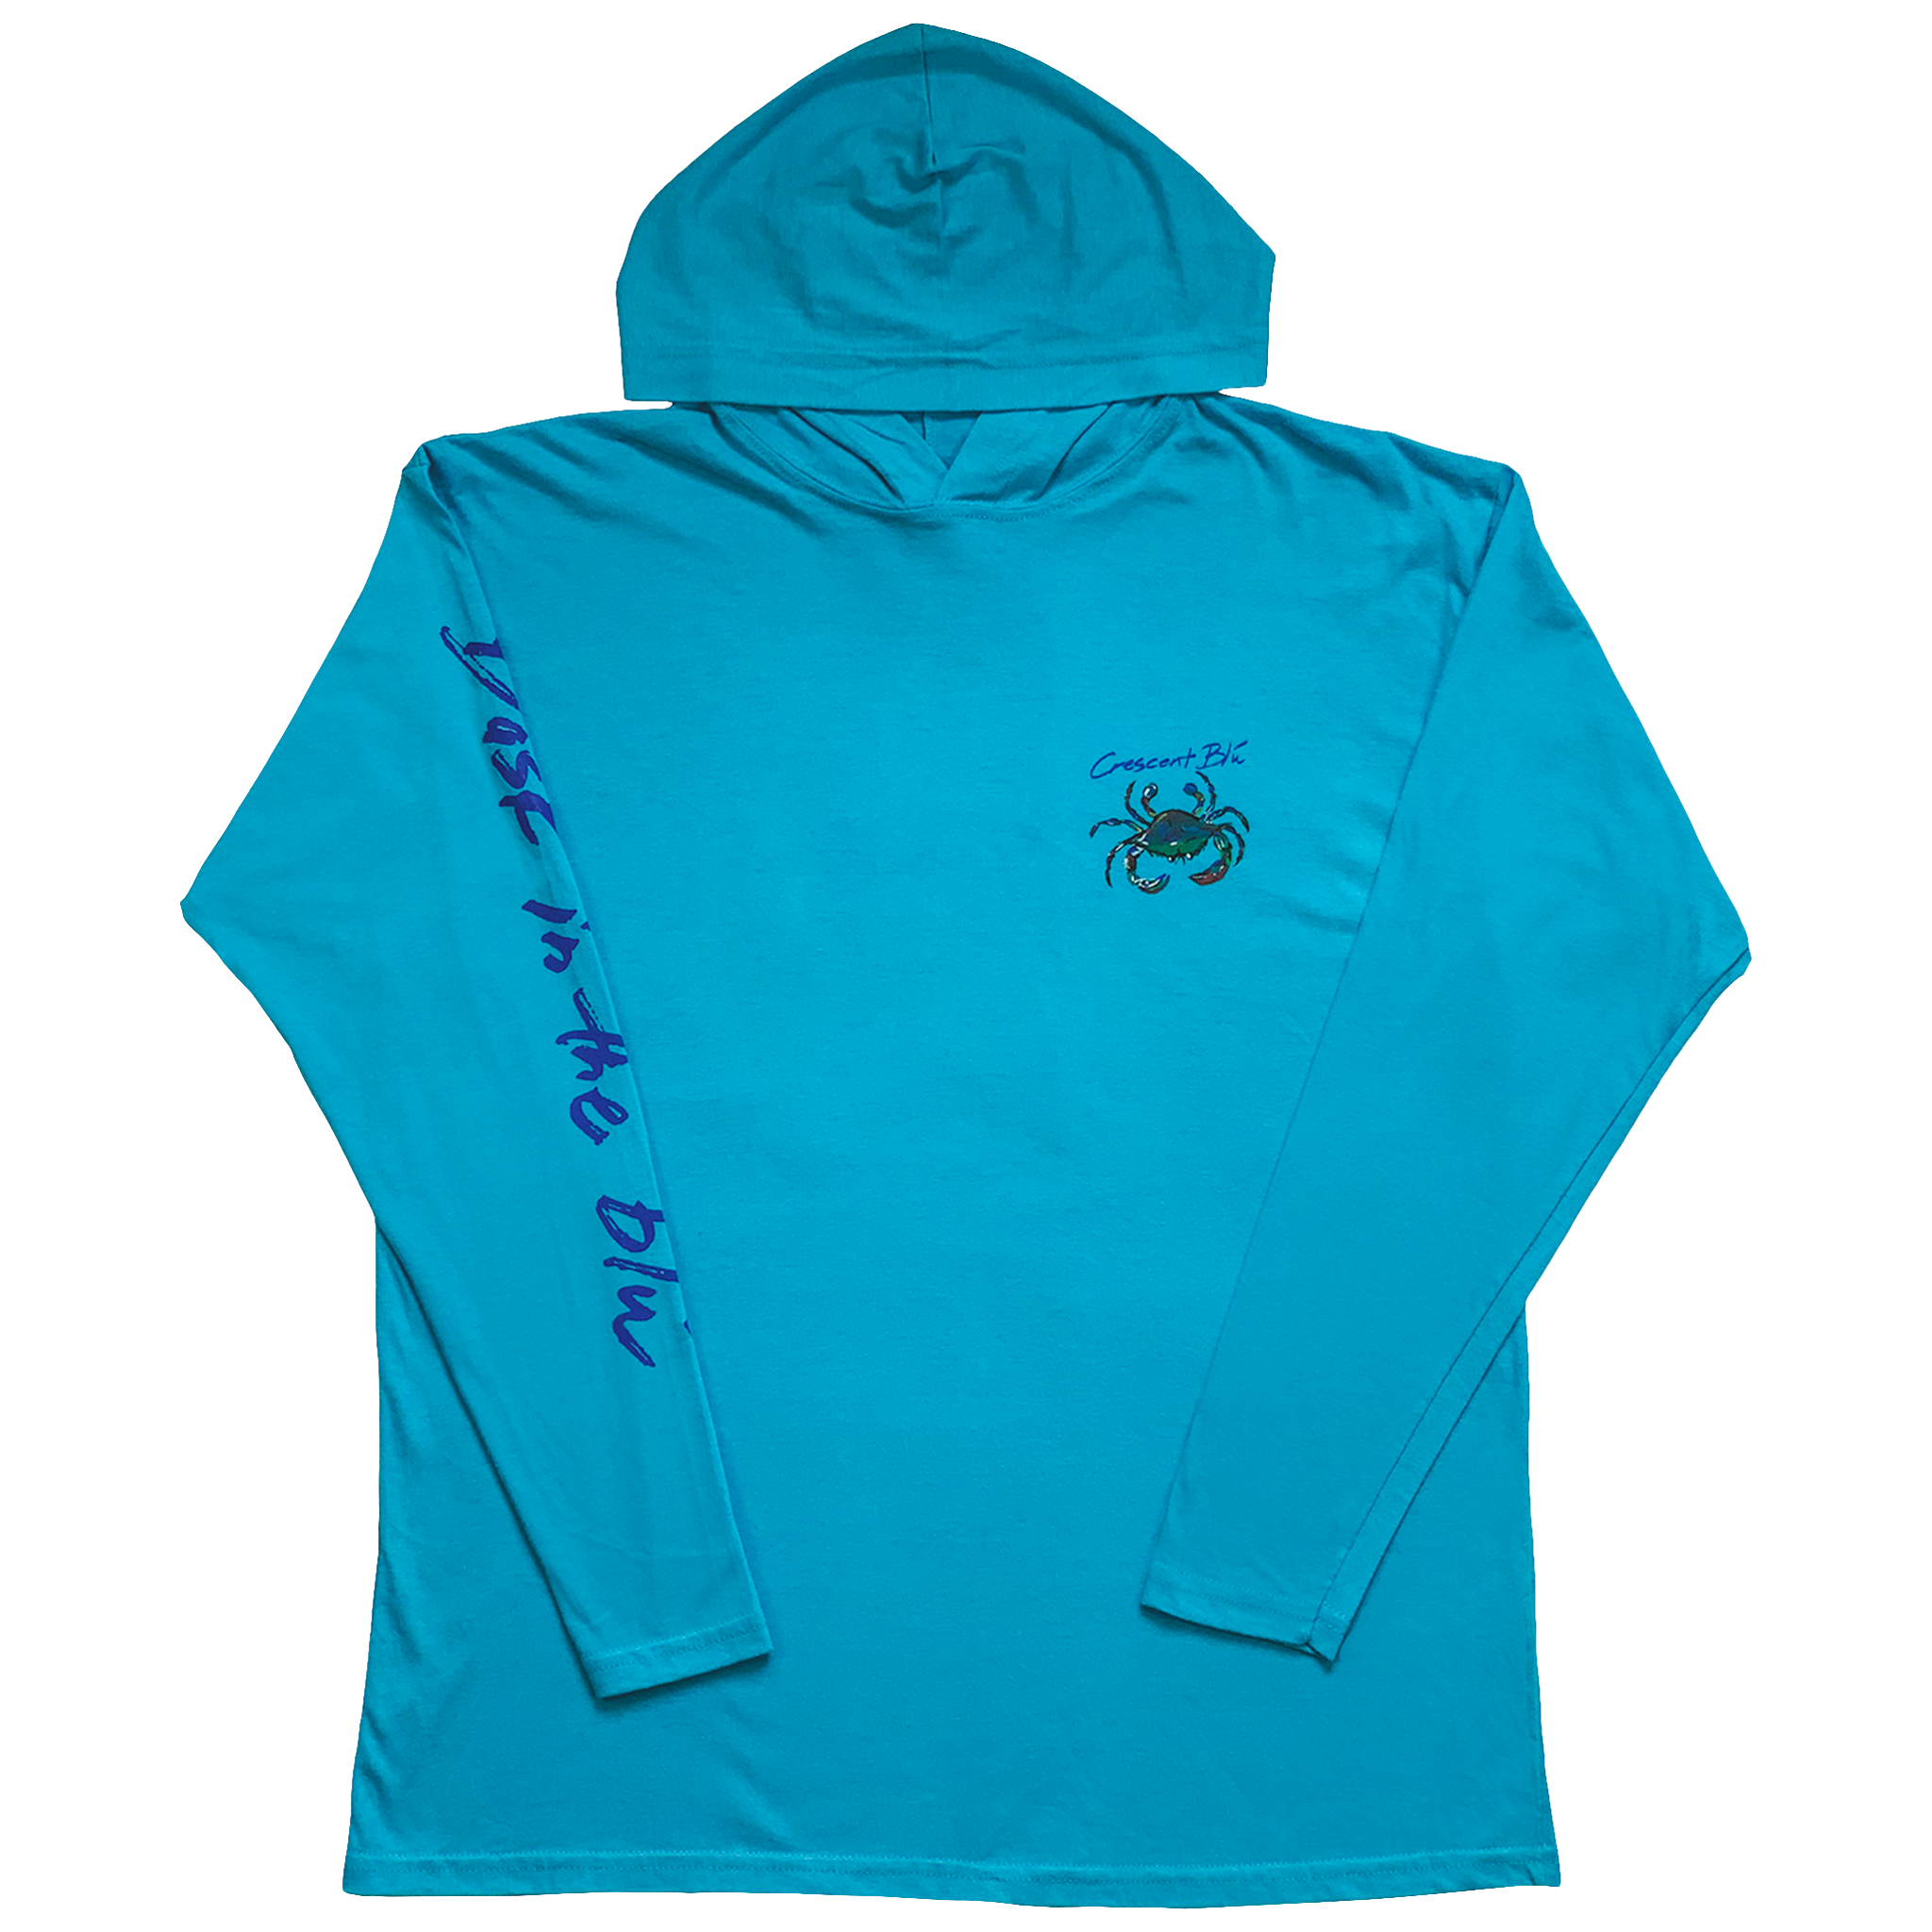 Youth T-shirt Hoodie in Carribean Blue. Front View. Multi-colored Crescent Blu crab logo on the upper left chest. Bask in the Blu printed along the length of the right sleeve. 